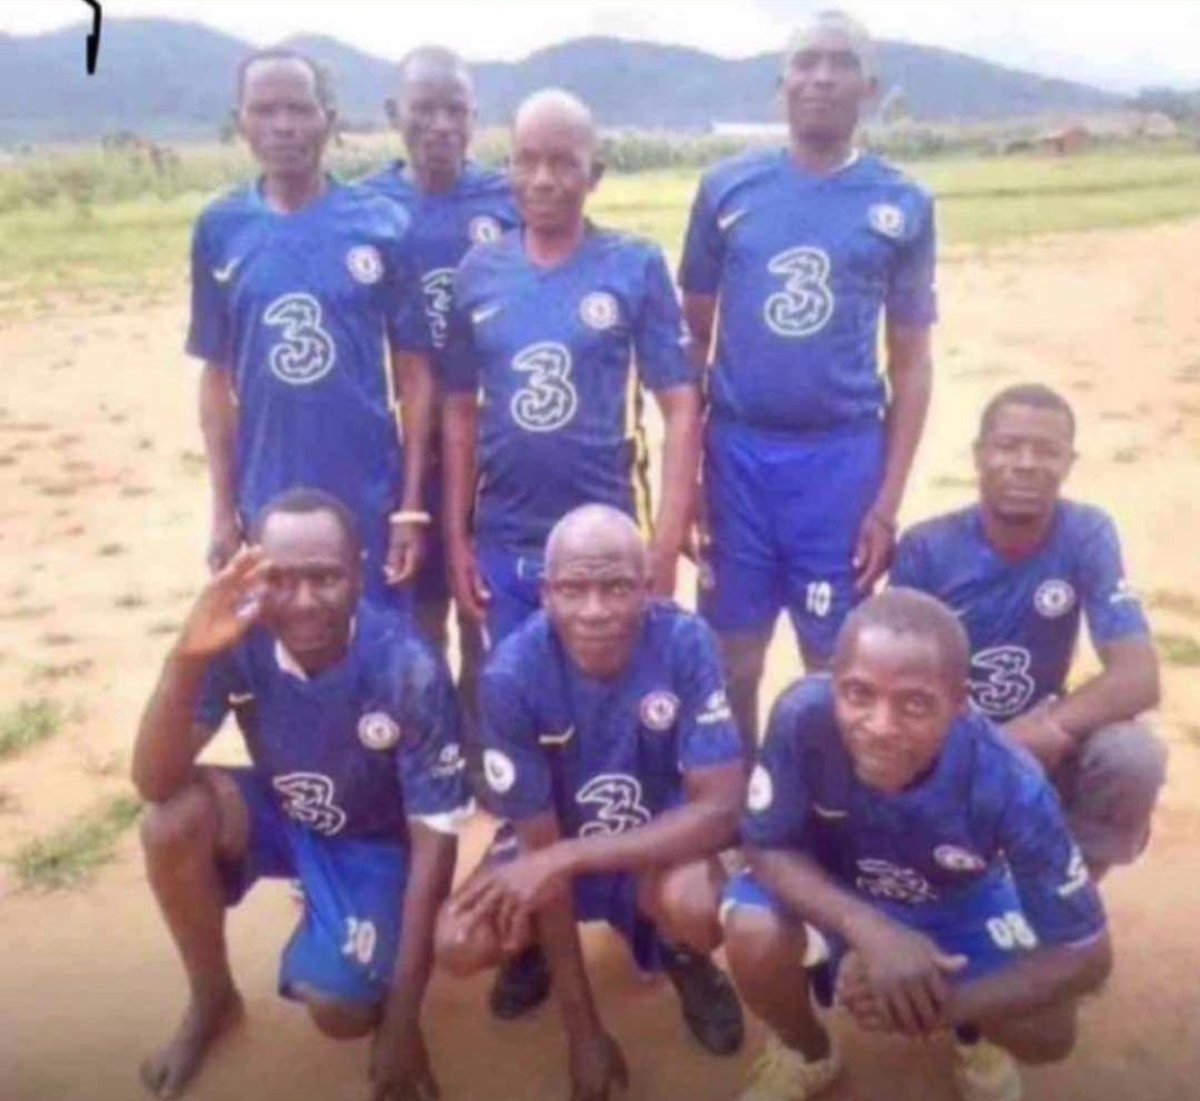 A rare picture of the Chelsea team that played against Arsenal yesterday. Woto woto seasoning 😅😅